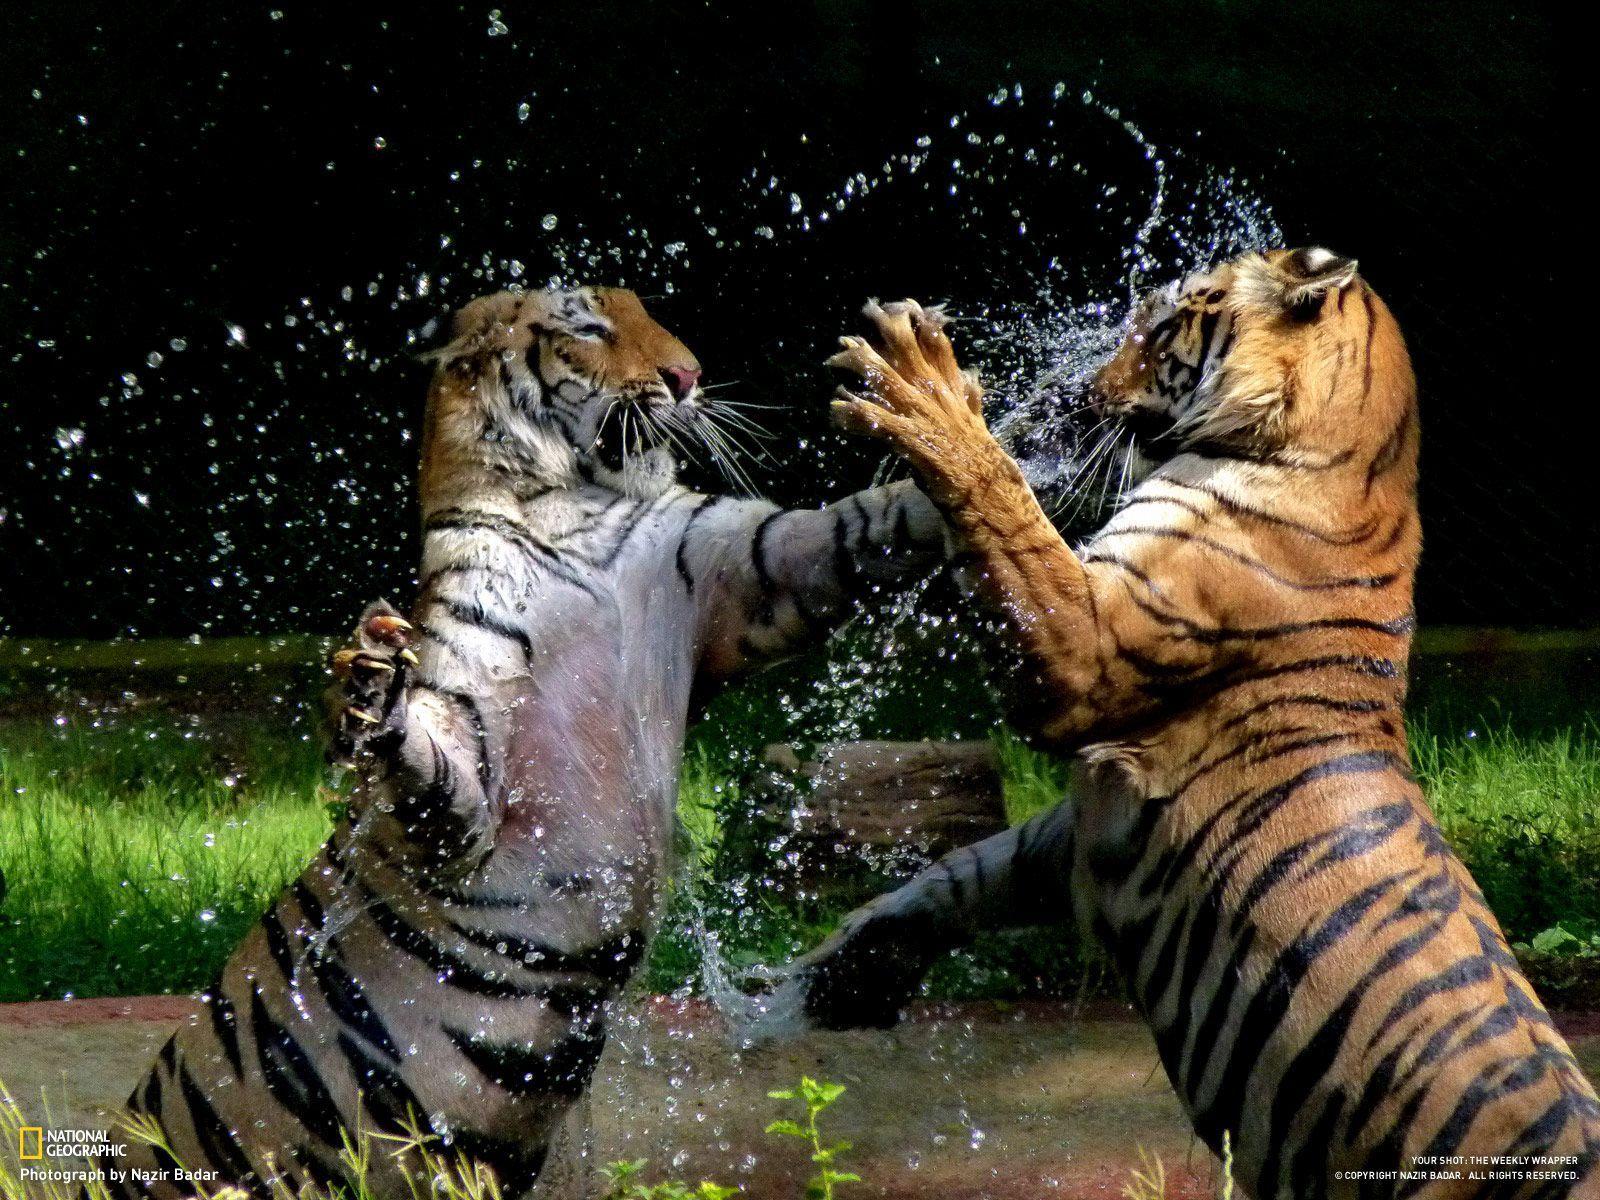 Bengal Tigers from National Geographic. Wildlife